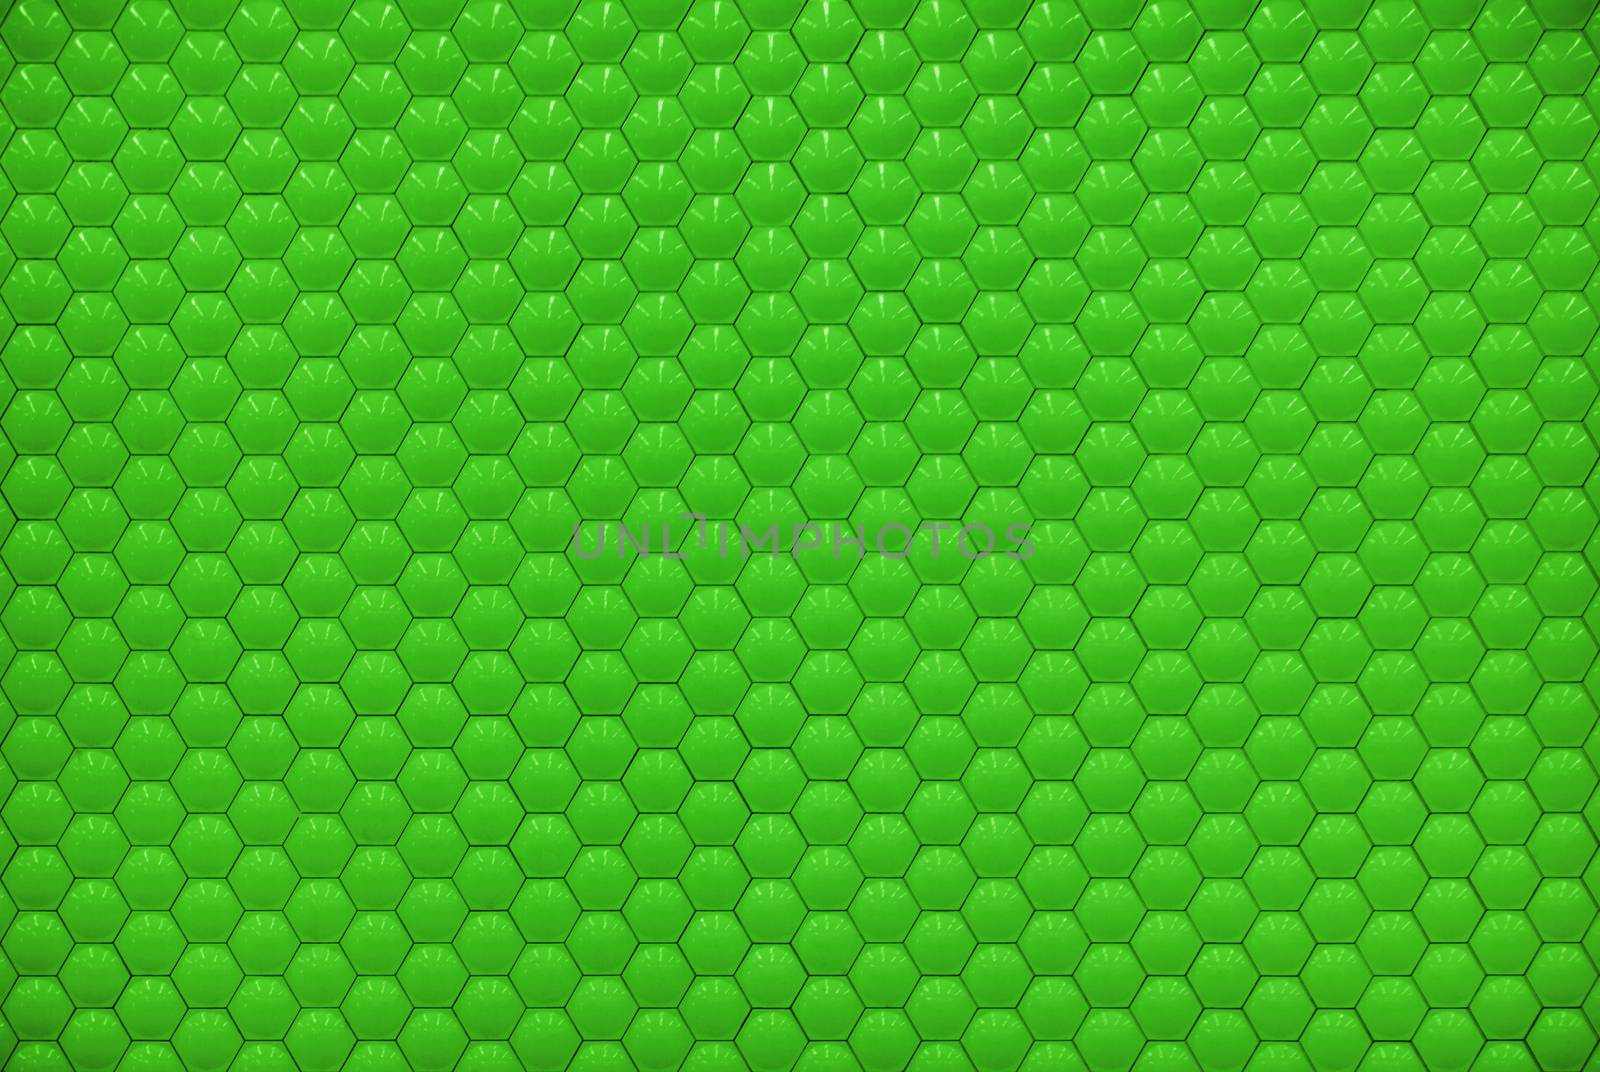 Green shiny hexagon bubble tile texture background by keneaster